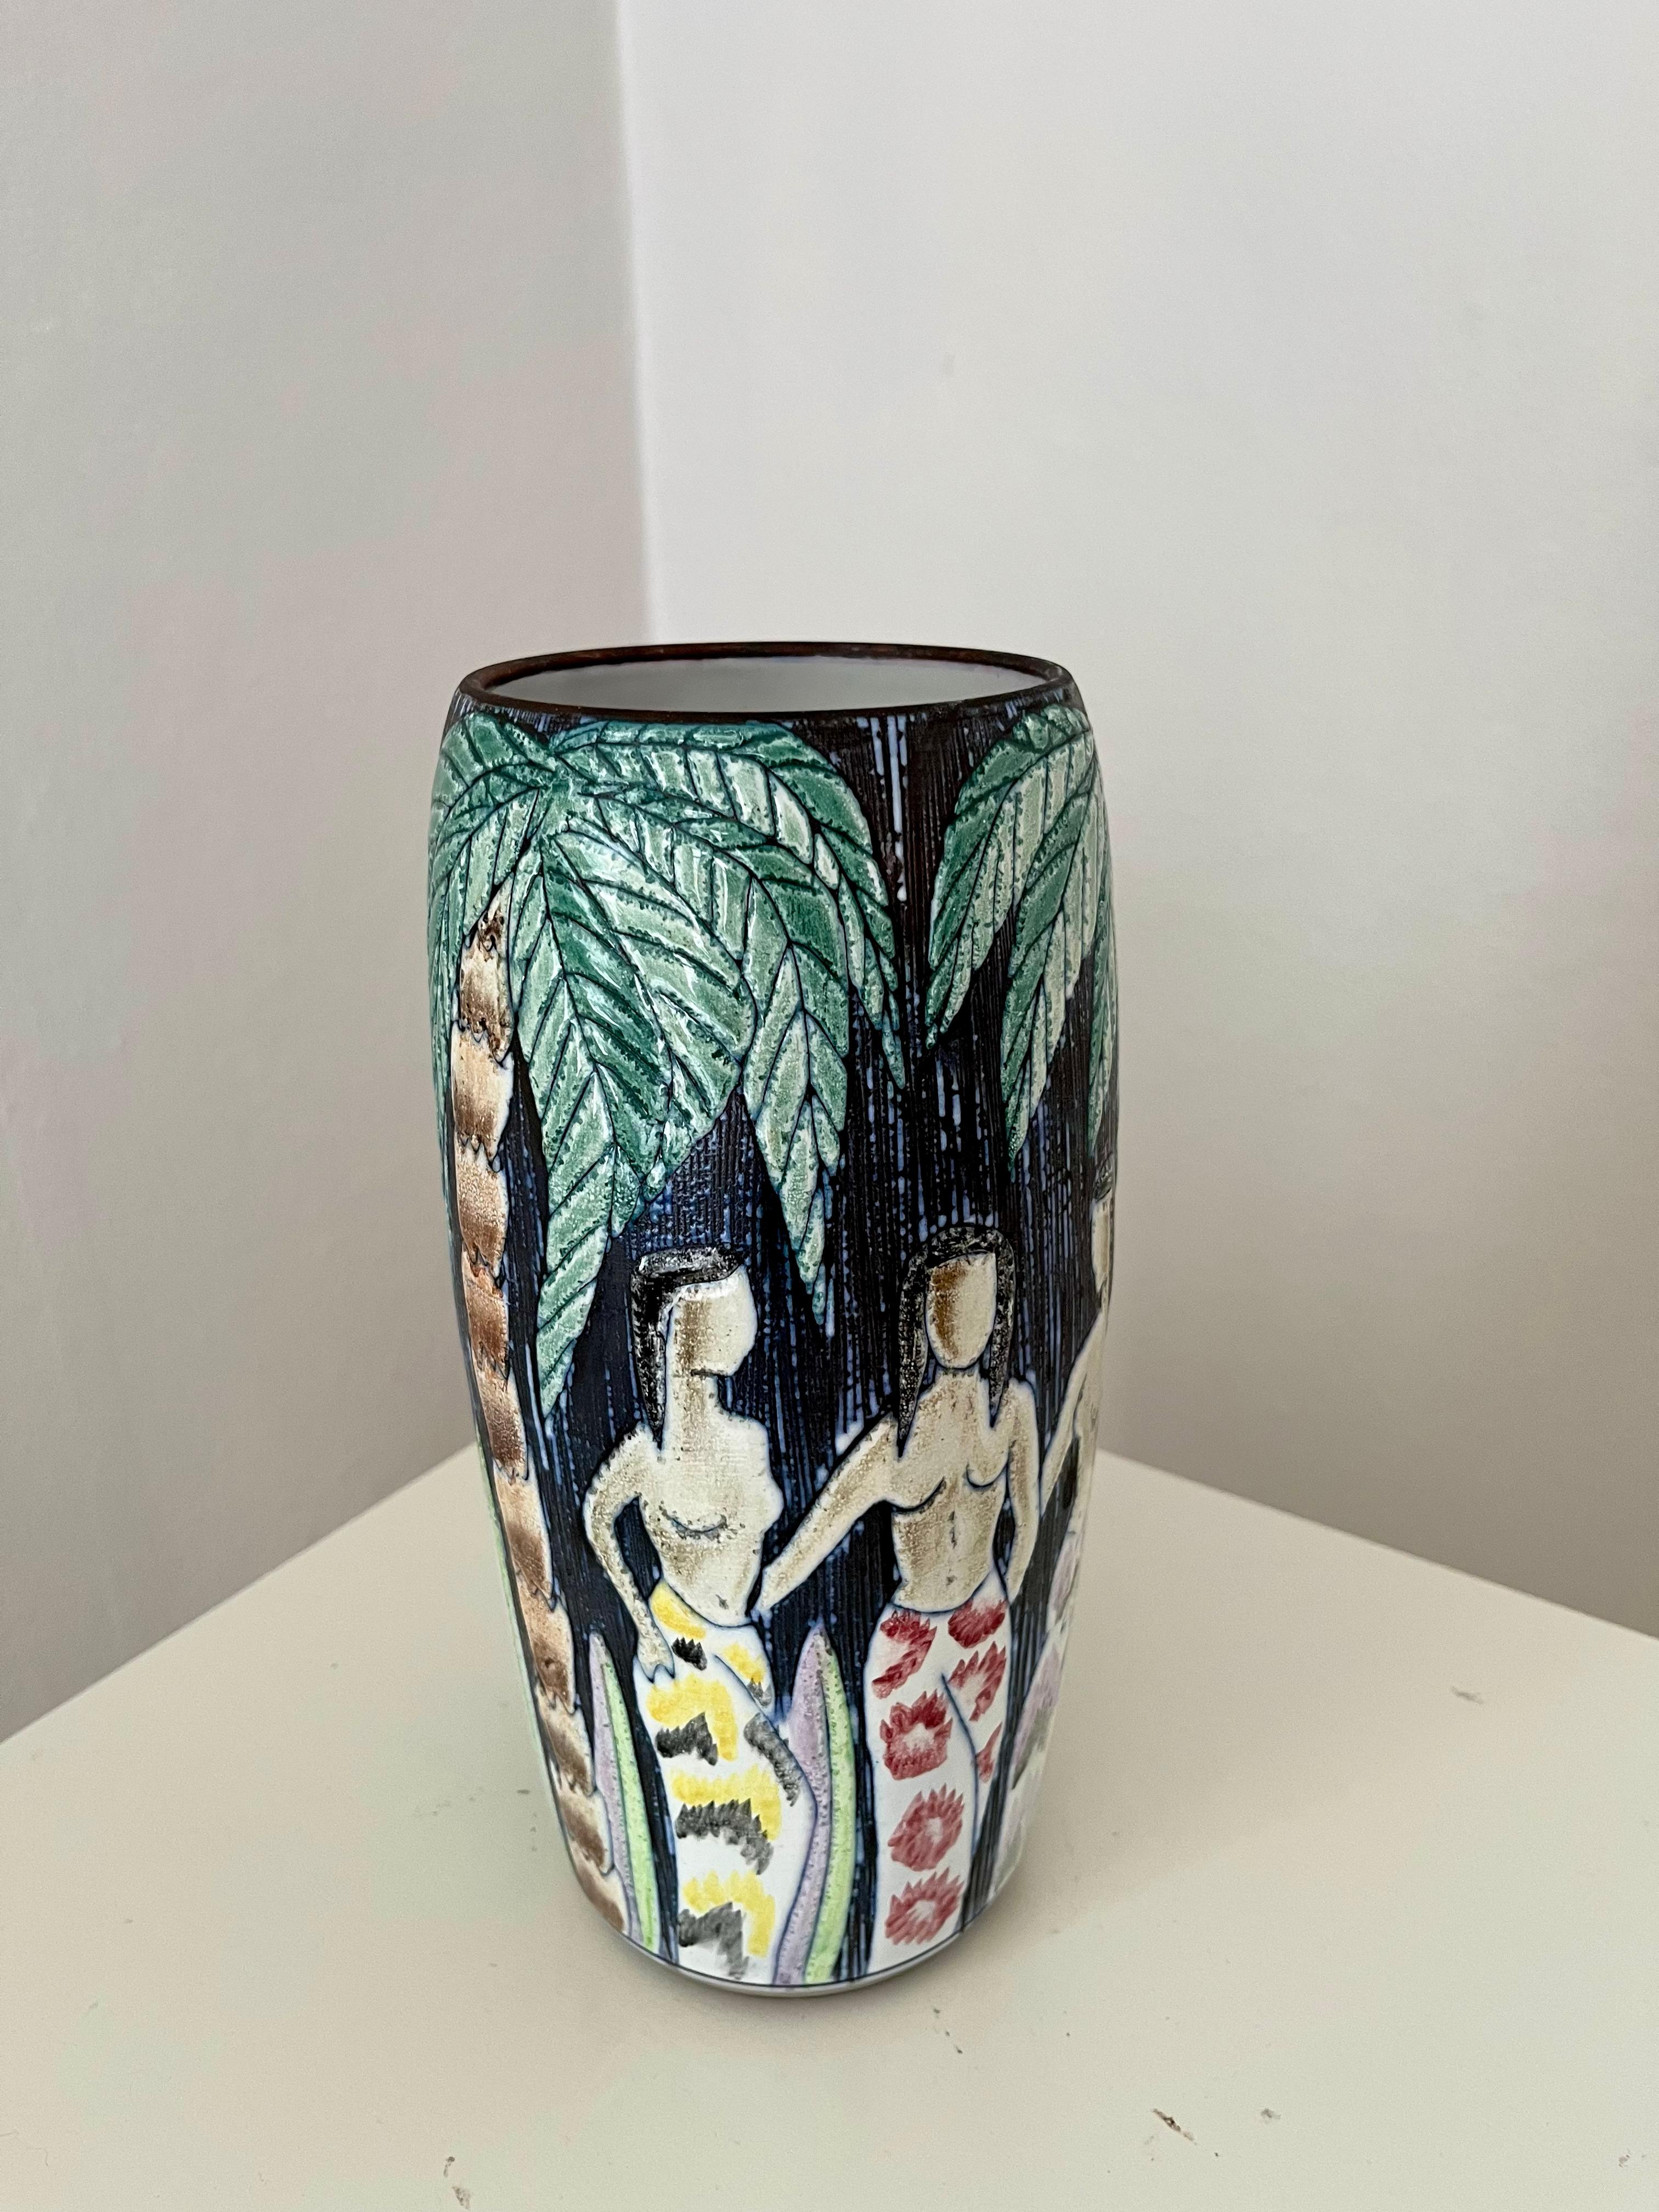 1960s Swedish hand decorated vase by Alingsås Ceramic with palm, flowers & women. Highly decorated and detailed in pleasing to the eyes nuances of green, white, pink, yellow, purple and red. 

Handmade and decorated with the sgraffito technique that